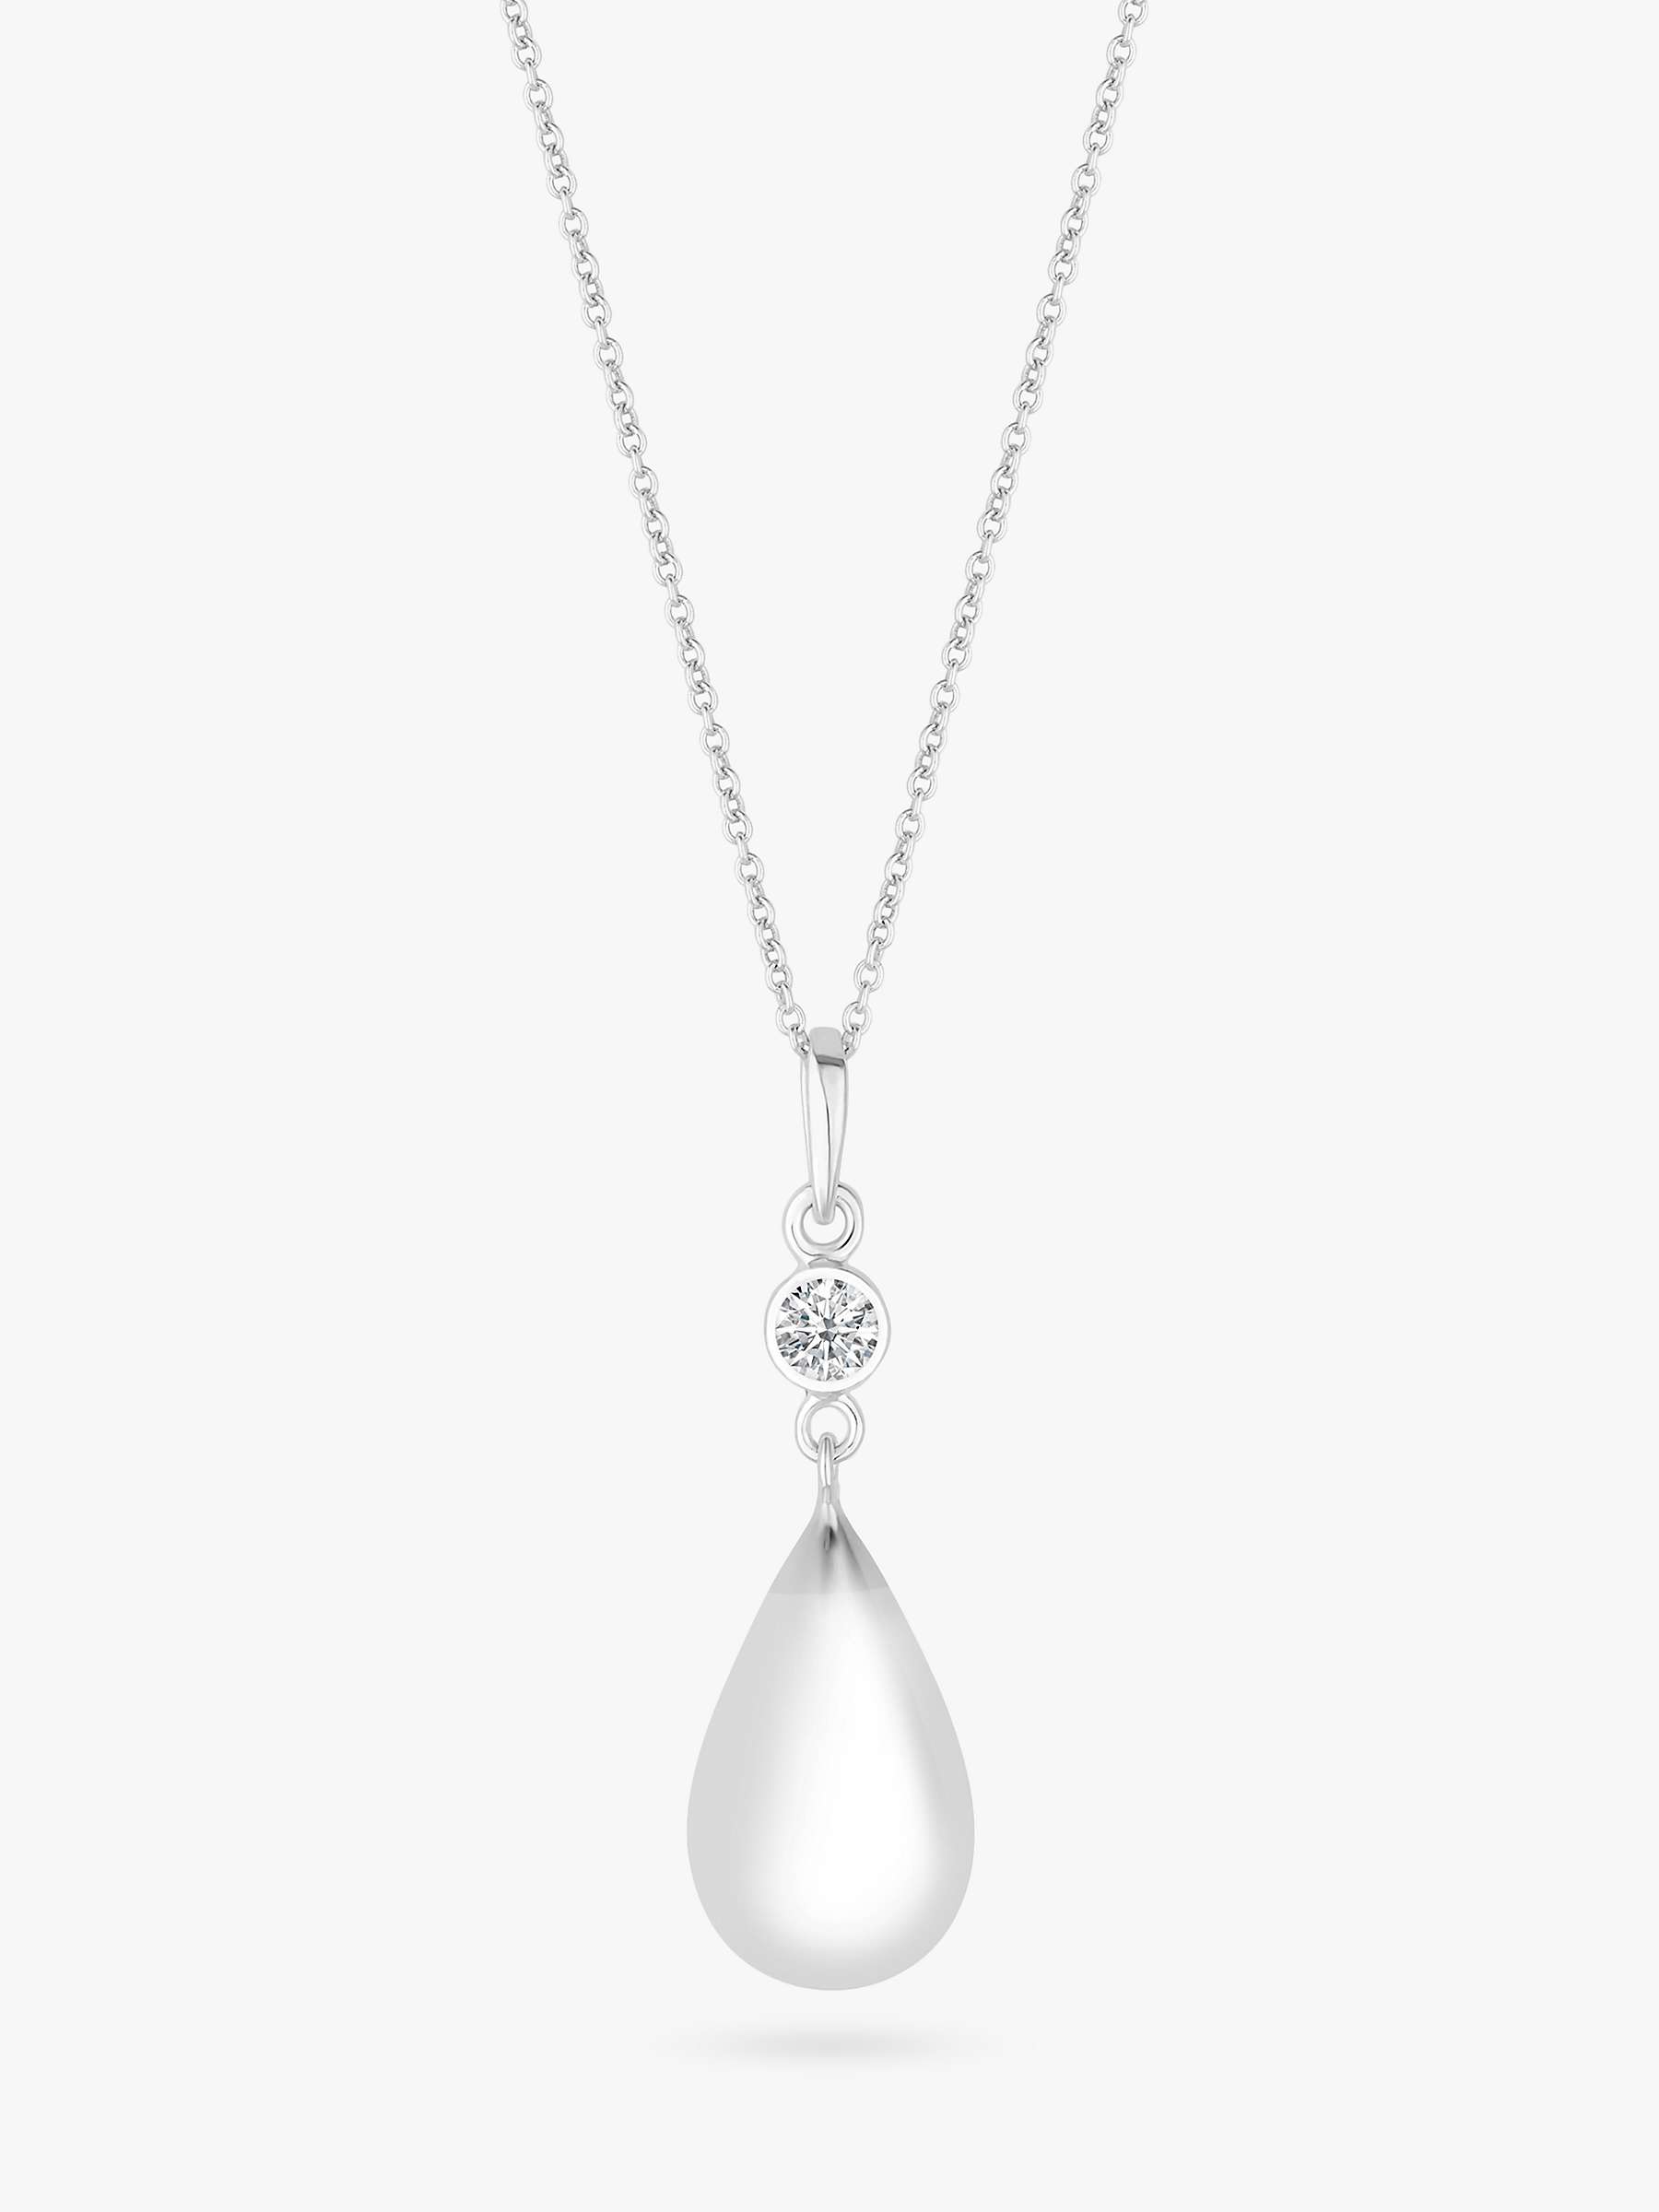 Buy Simply Silver Besel Polished Drop Necklace, Silver Online at johnlewis.com